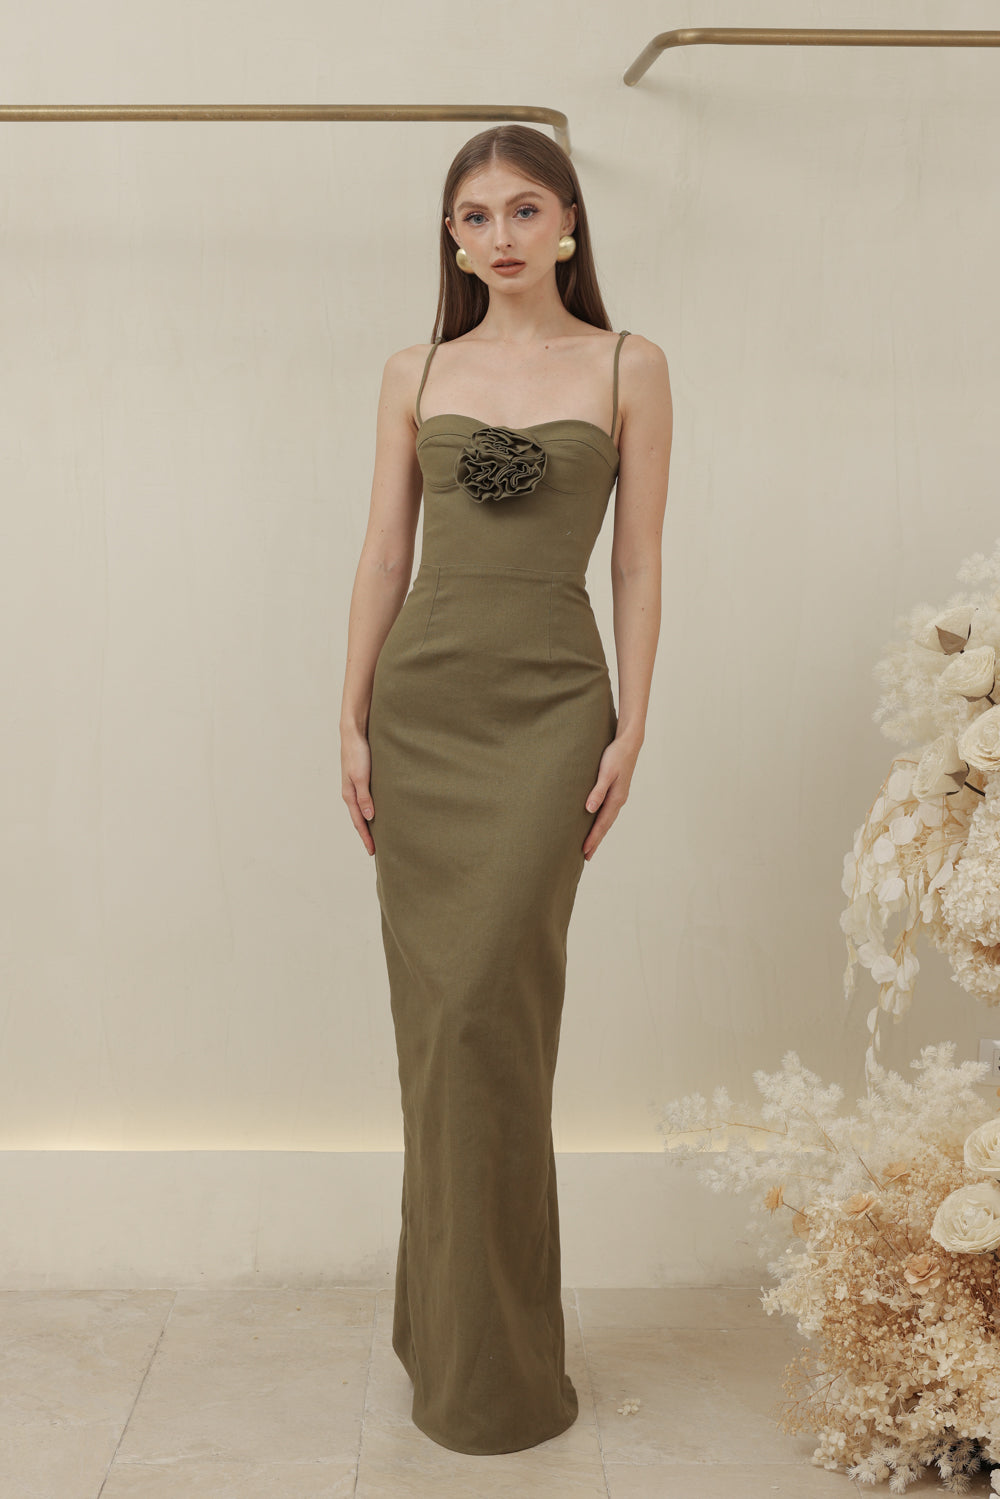 JULIETTE DRESS Strappy Pencil Skirt Maxi with Trio Floral Detail (Olive Linen)